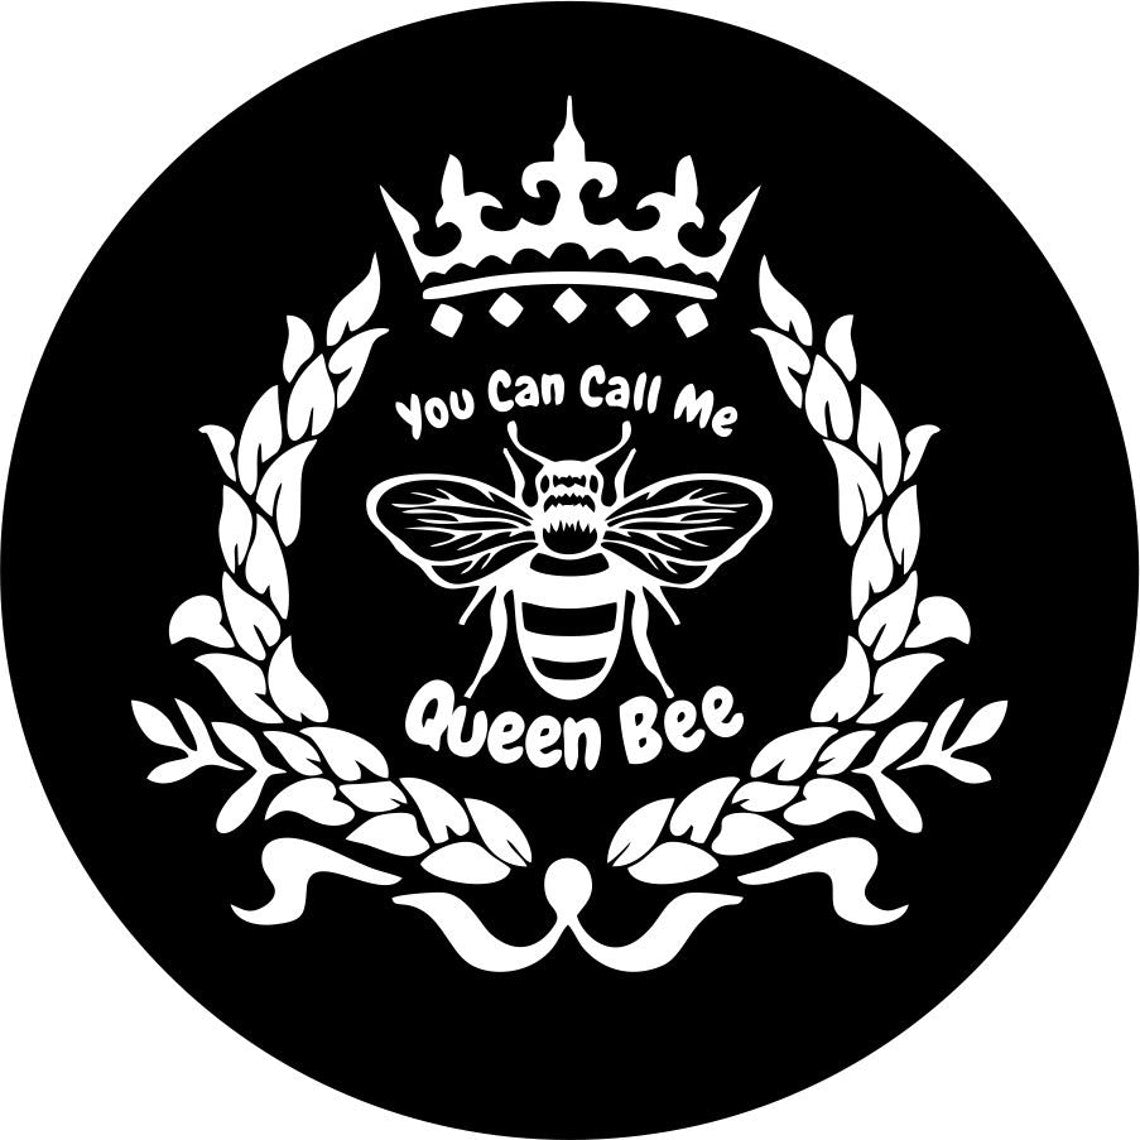 You can call me queen bee insignia design spare tire cover for Jeep, RV, Bronco, Camper, Trailer, and more on black vinyl